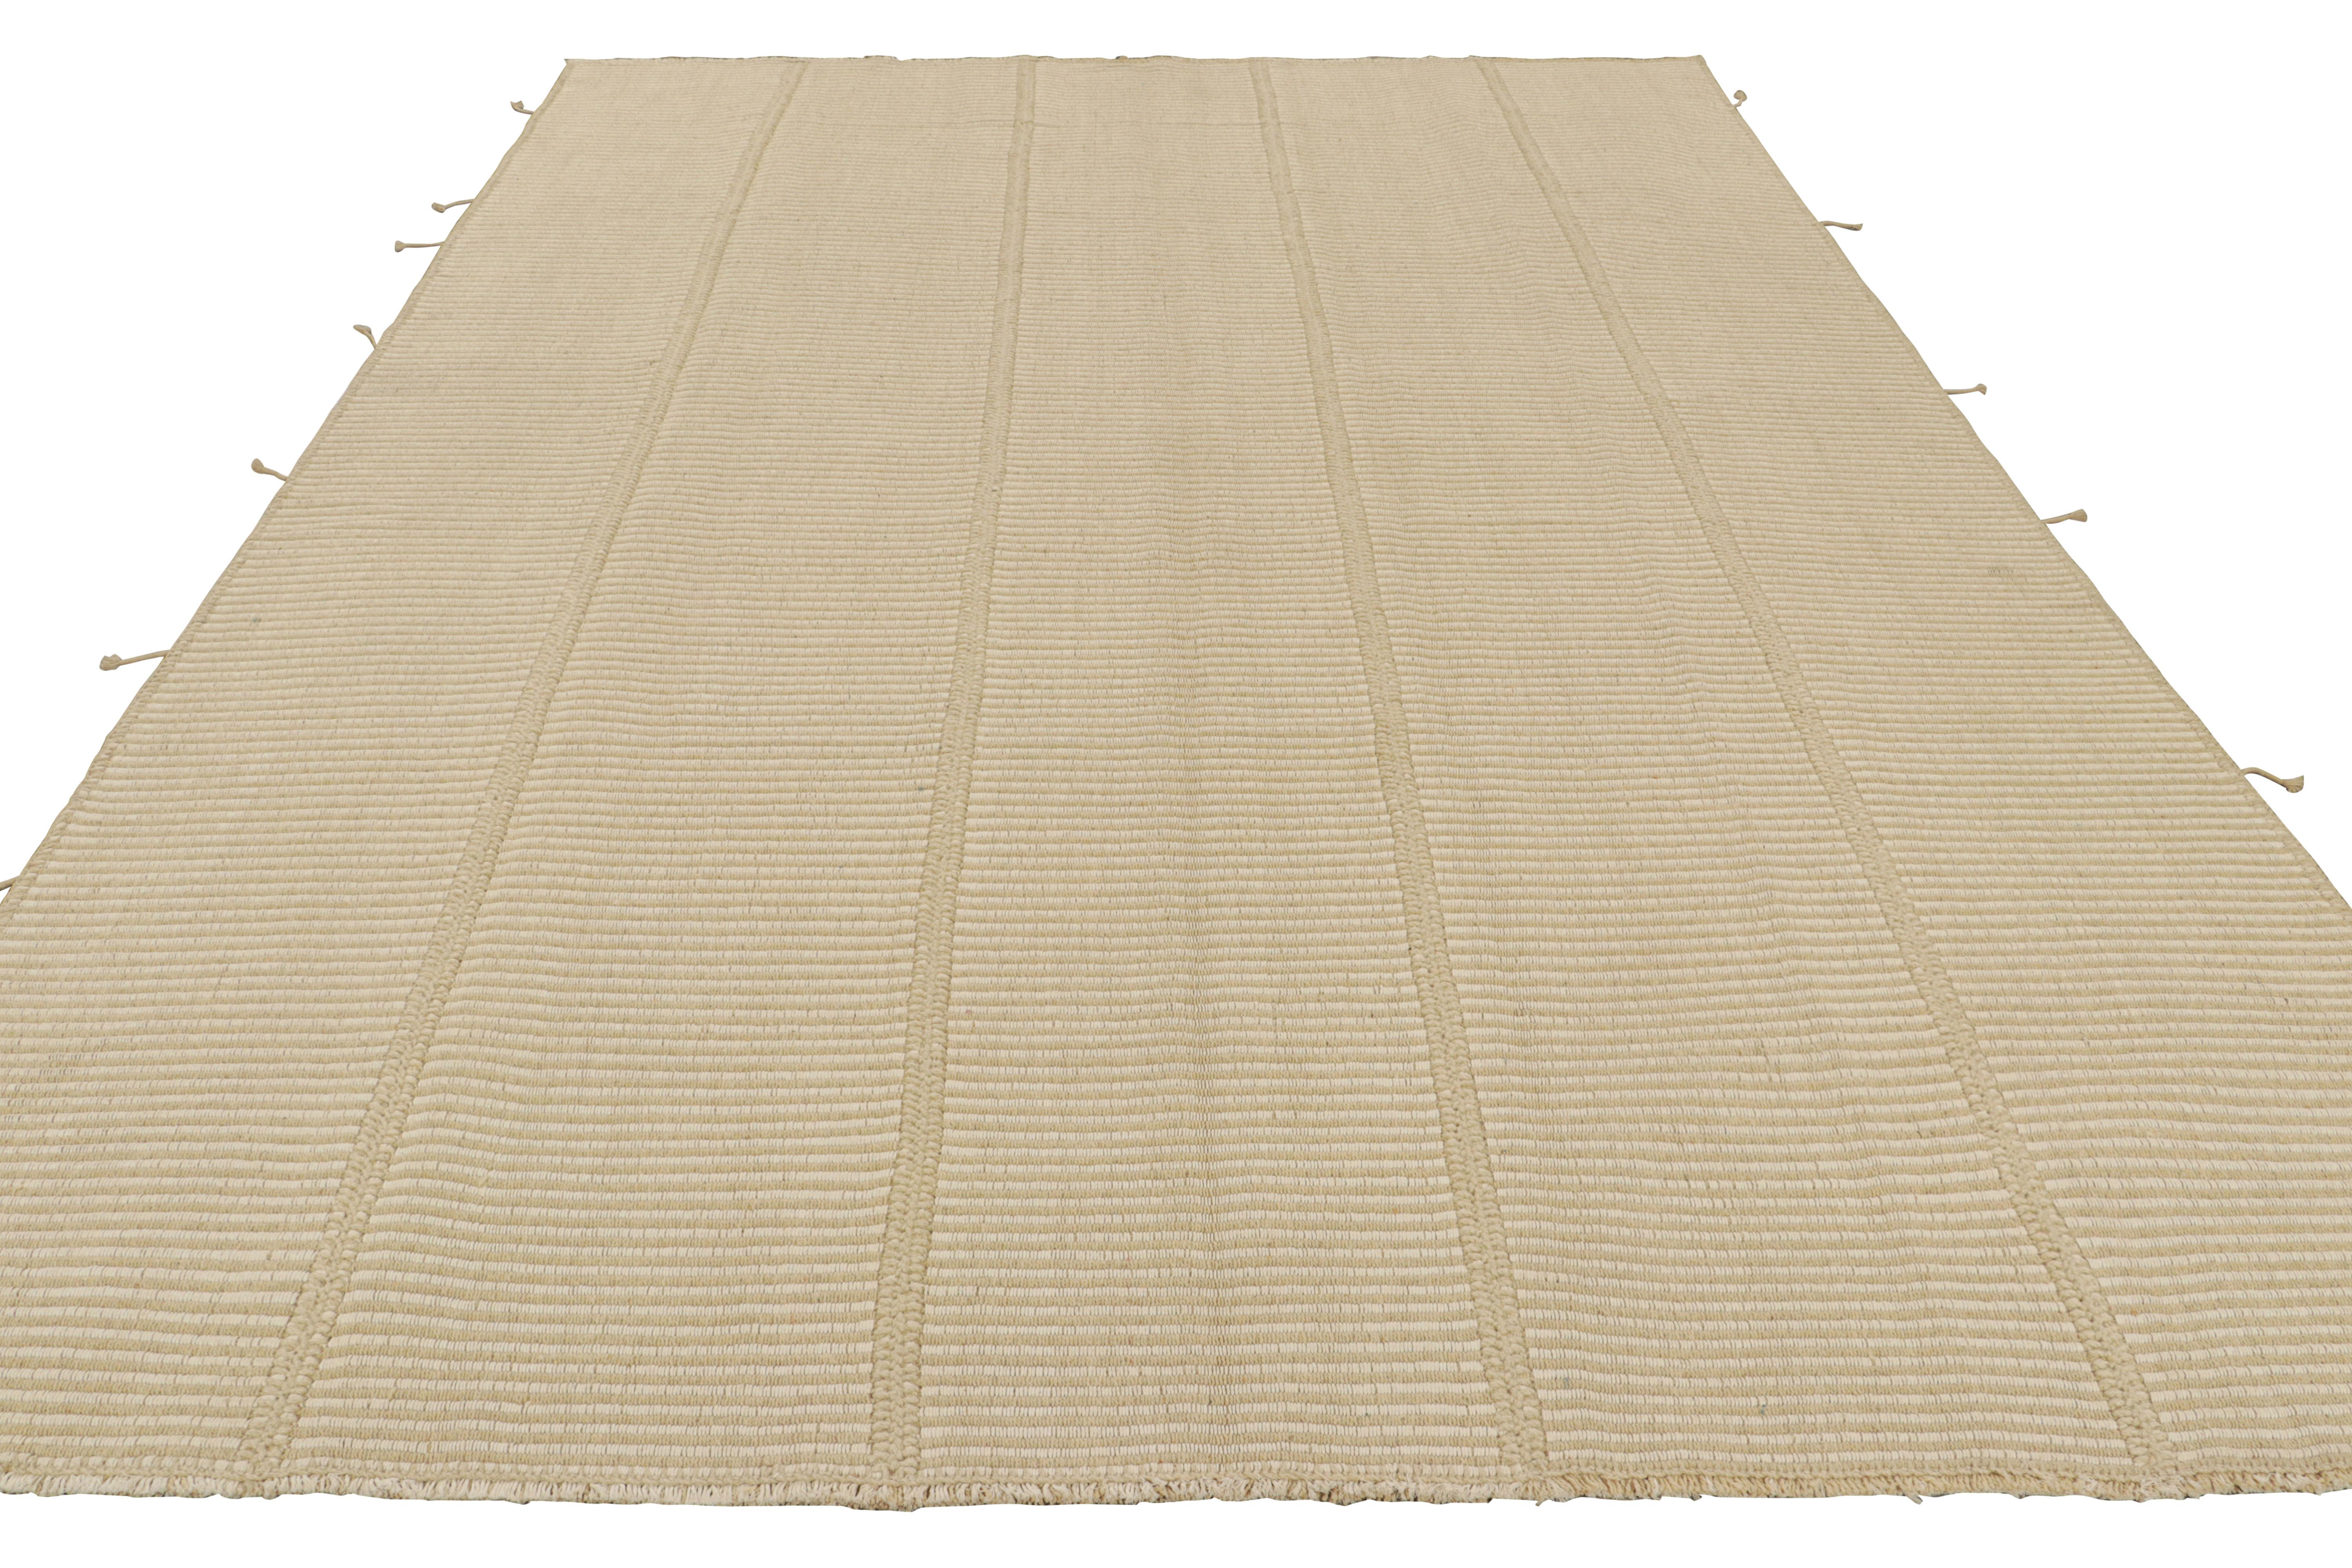 Hand-Woven Rug & Kilim’s Contemporary Kilim in Cream White and Beige Textural Stripes For Sale